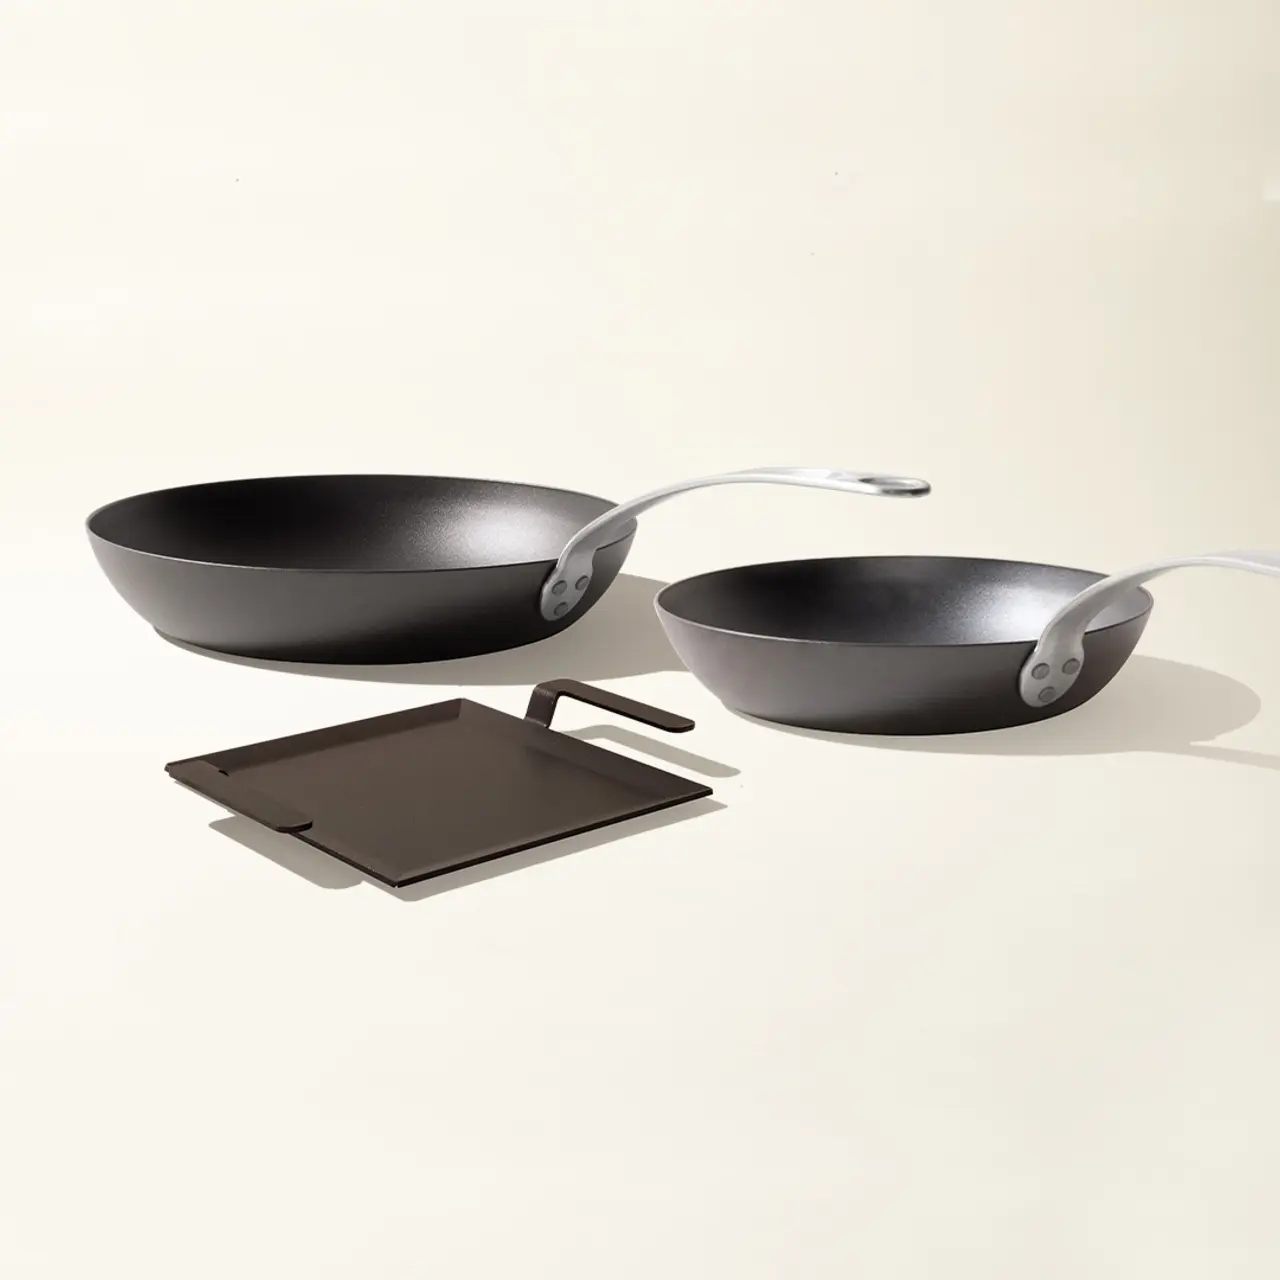 Two black frying pans with silver handles are accompanied by square, dark trivets against a light background.